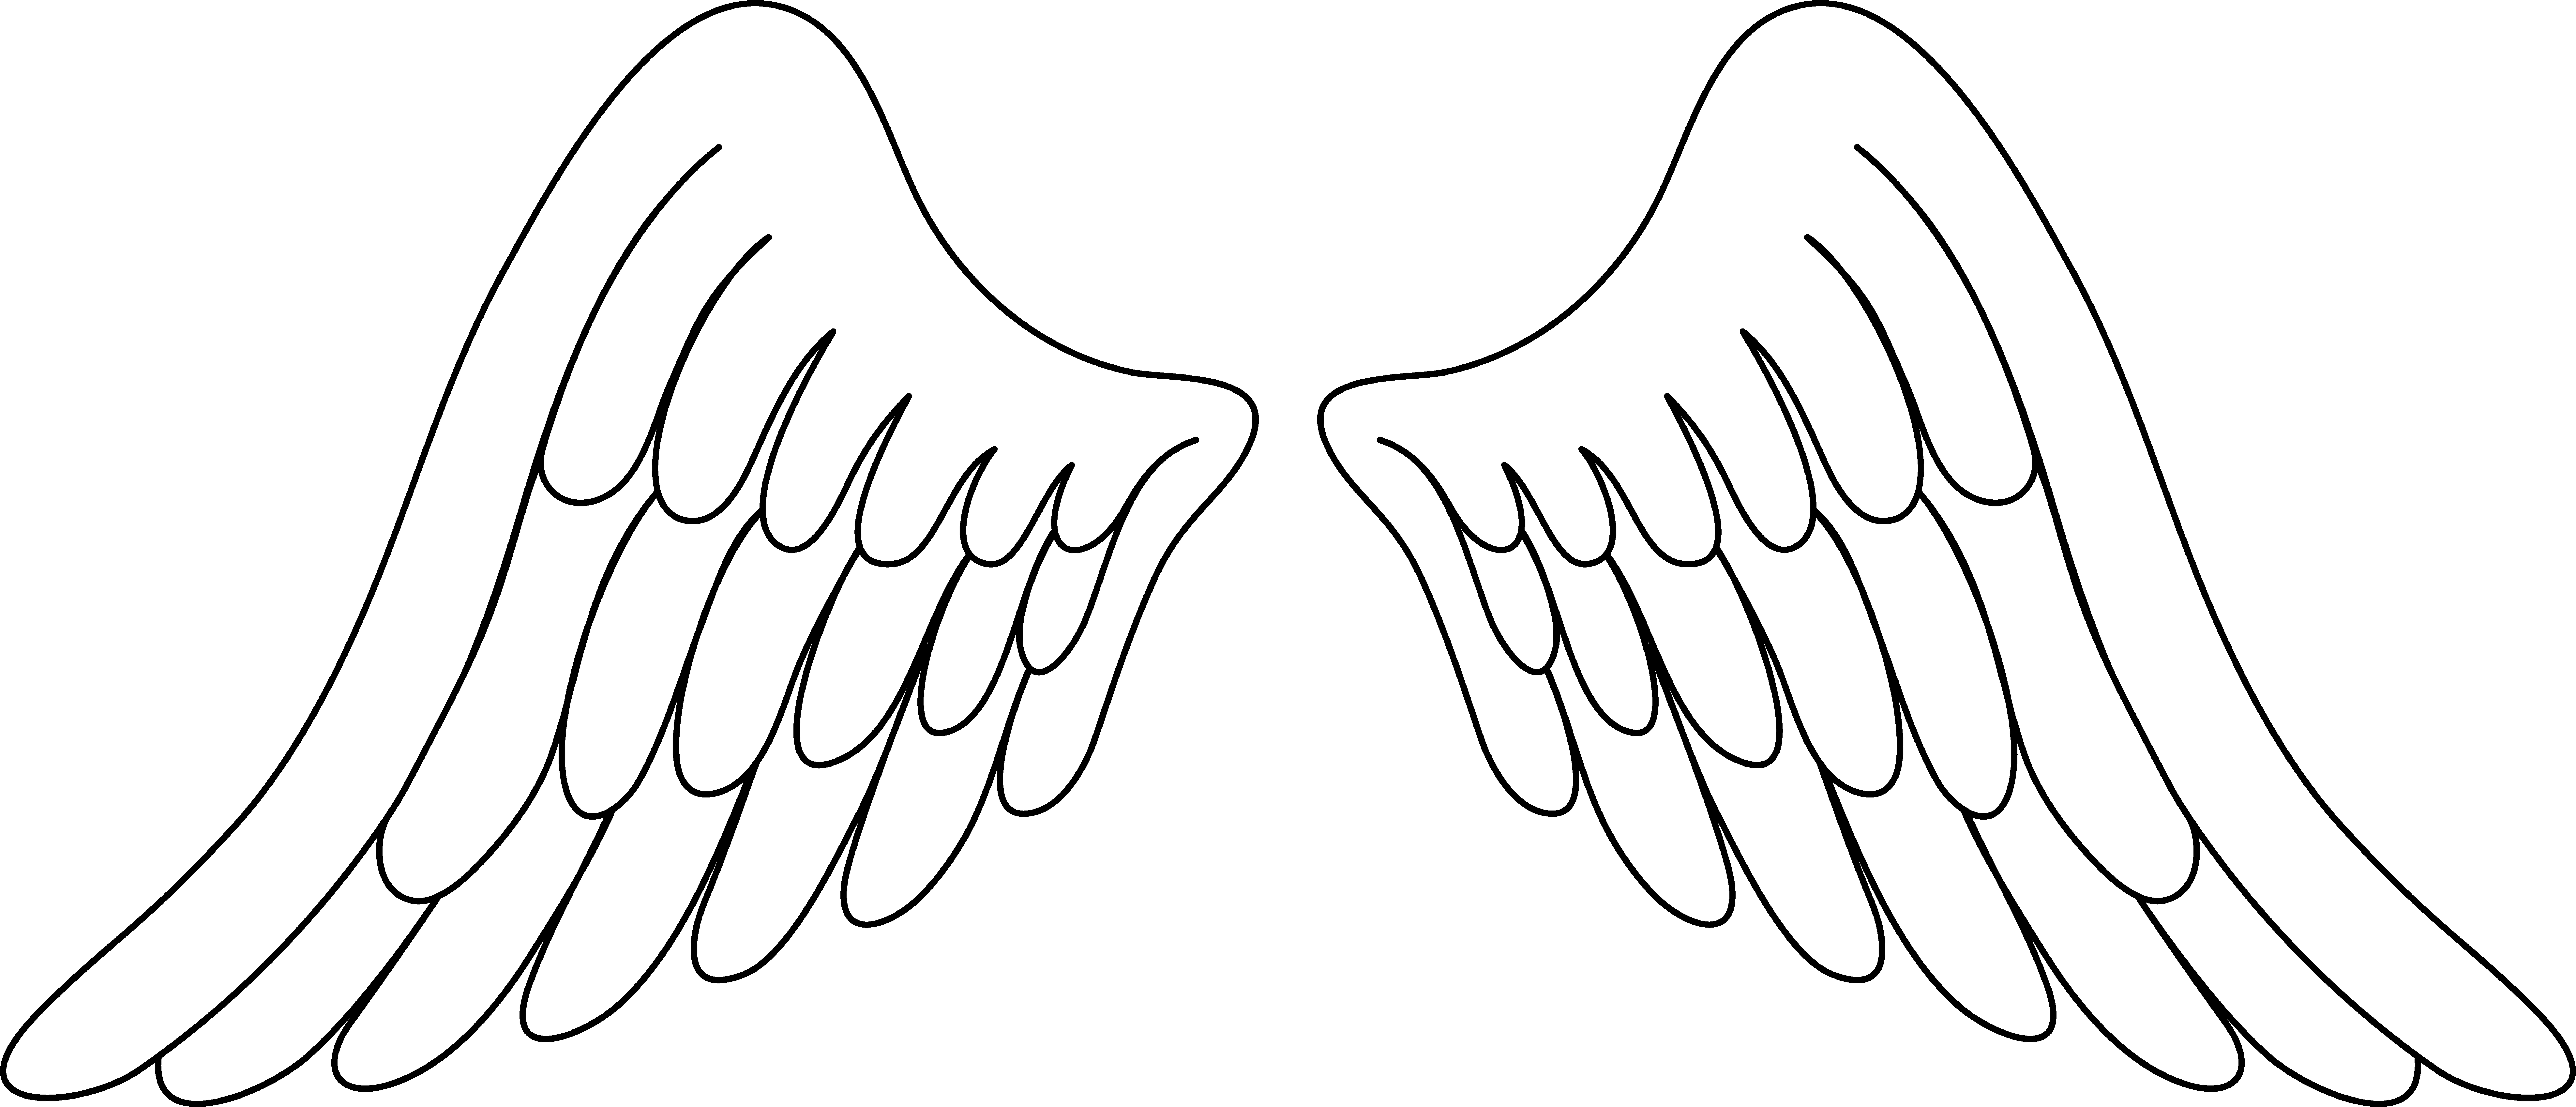 Angel wings wing clip. Halo clipart peaceful